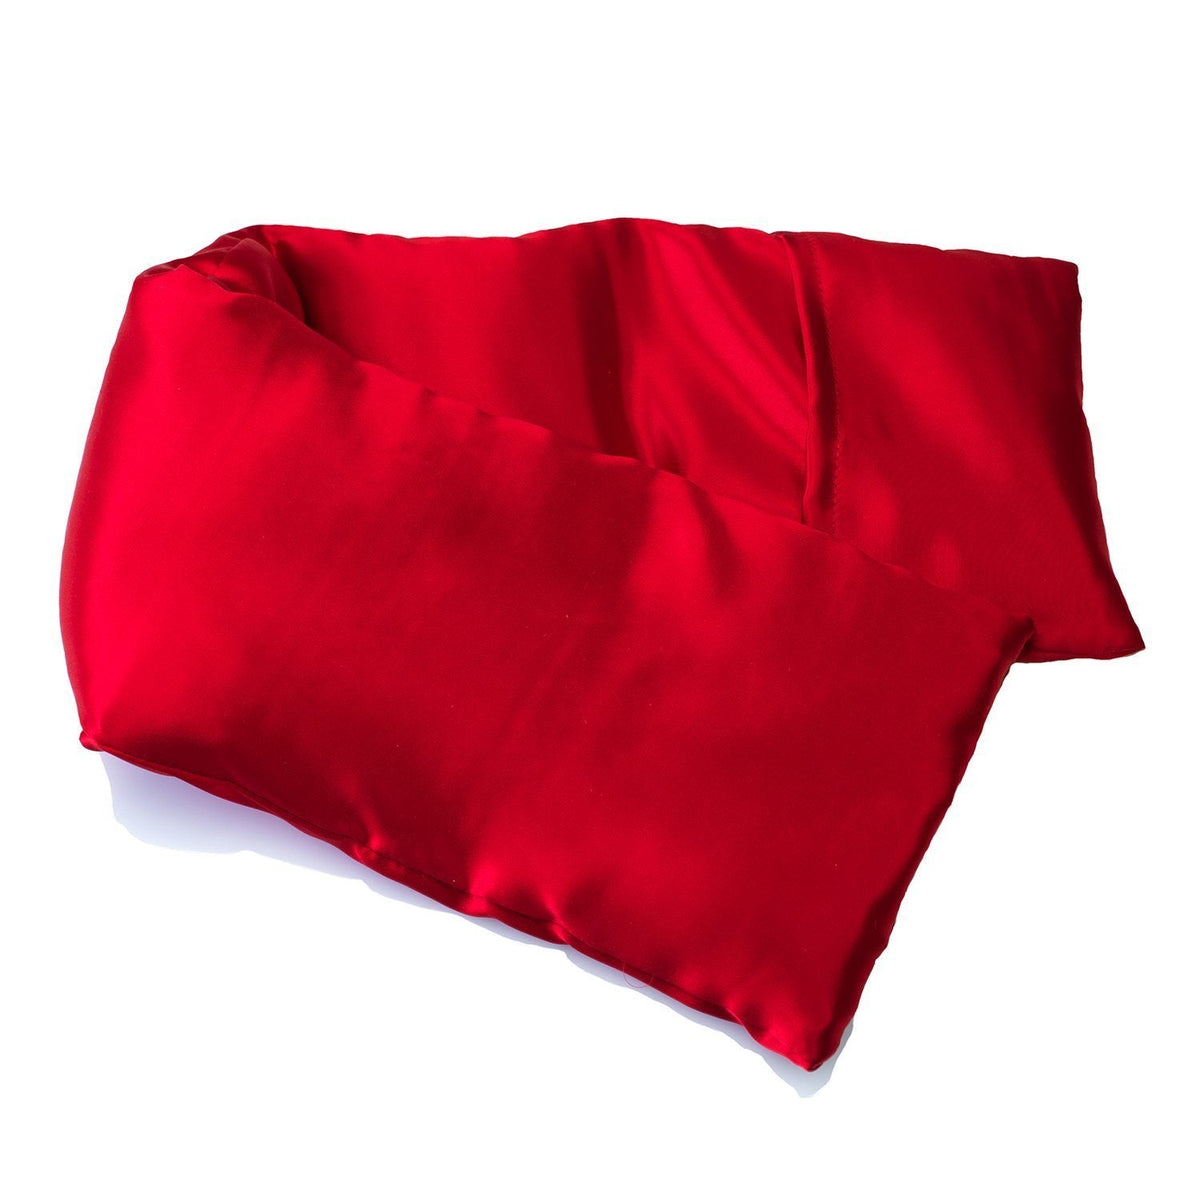 A vibrant red satin pillowcase with smooth texture, slightly wrinkled, featuring an elizabeth W Silk Hot/Cold Flaxseed Pack - Red, isolated on a white background.